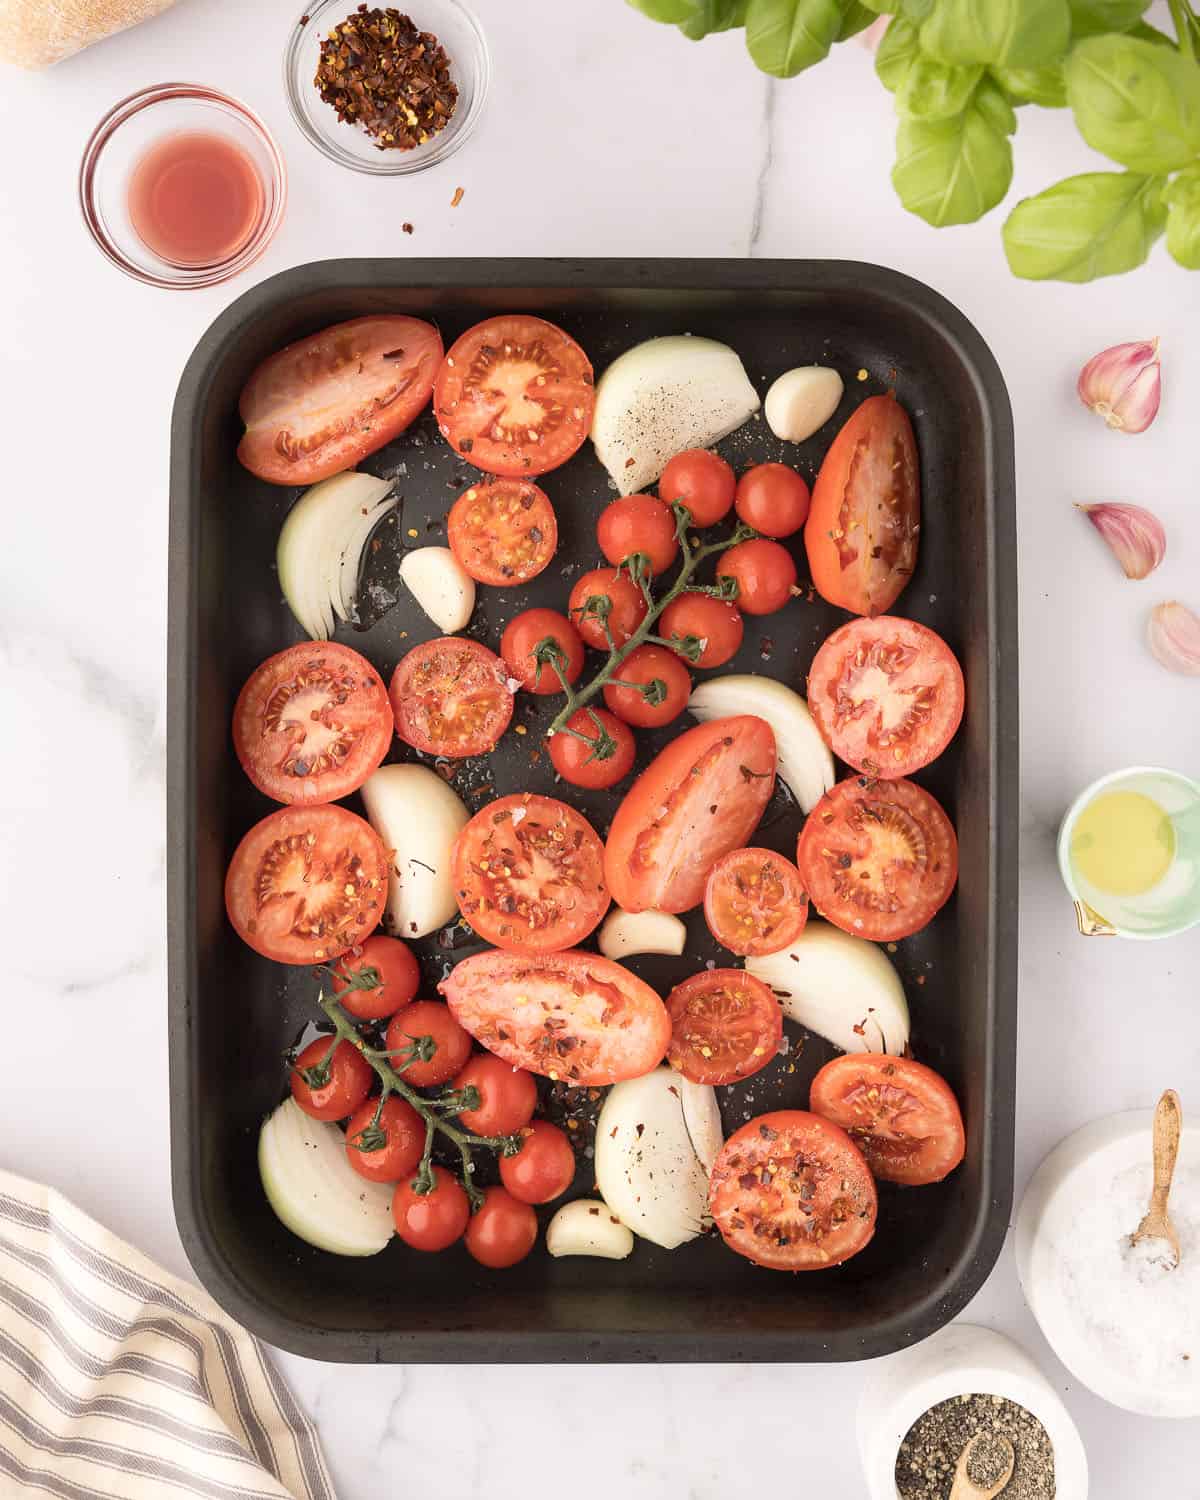 Tomatoes, onion wedges, and whole garlic cloves arranged in a baking an, surrounded by small bowls of olive oil, vinegar, and whole garlic cloves. Top view.